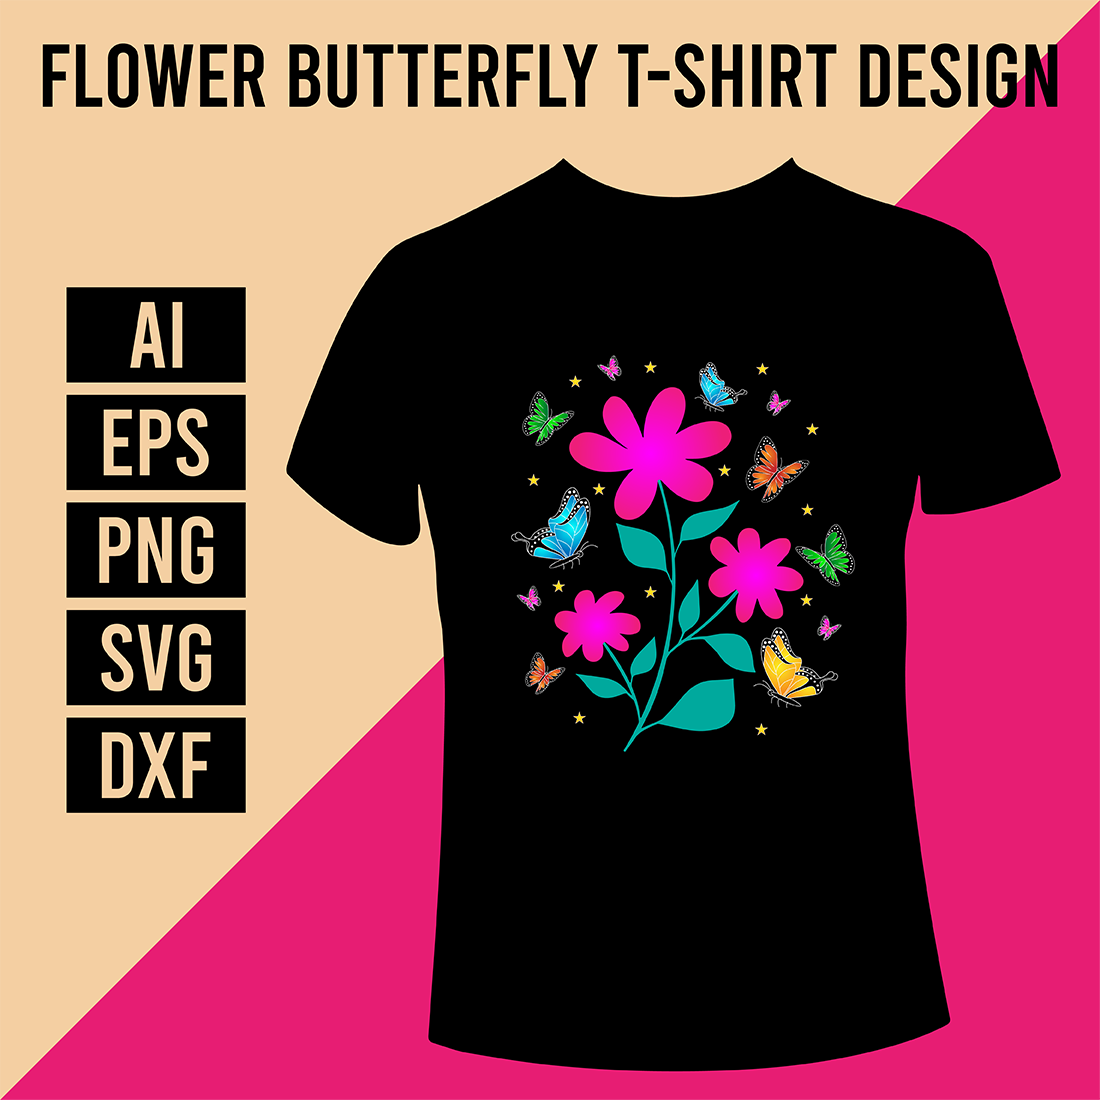 Flower Butterfly T-Shirt Design cover image.